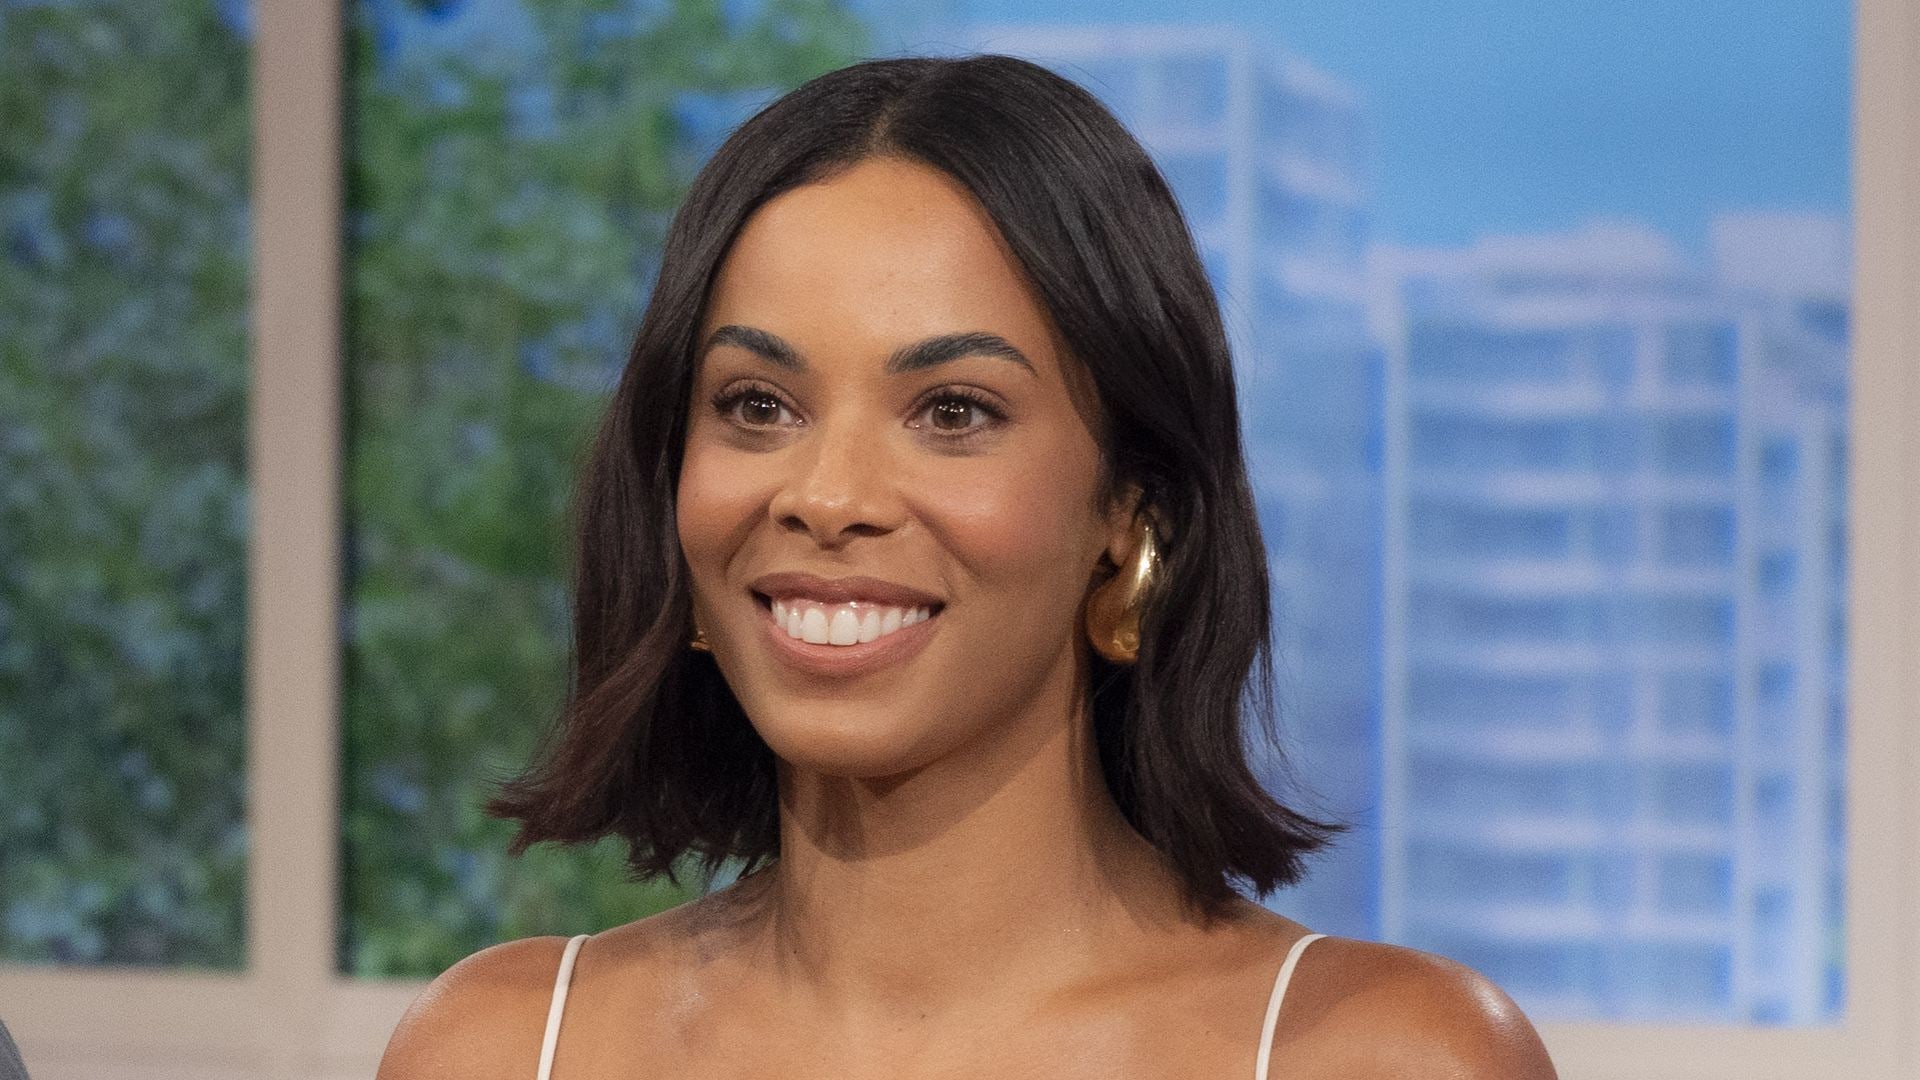 Rochelle Humes on 'This Morning' TV show